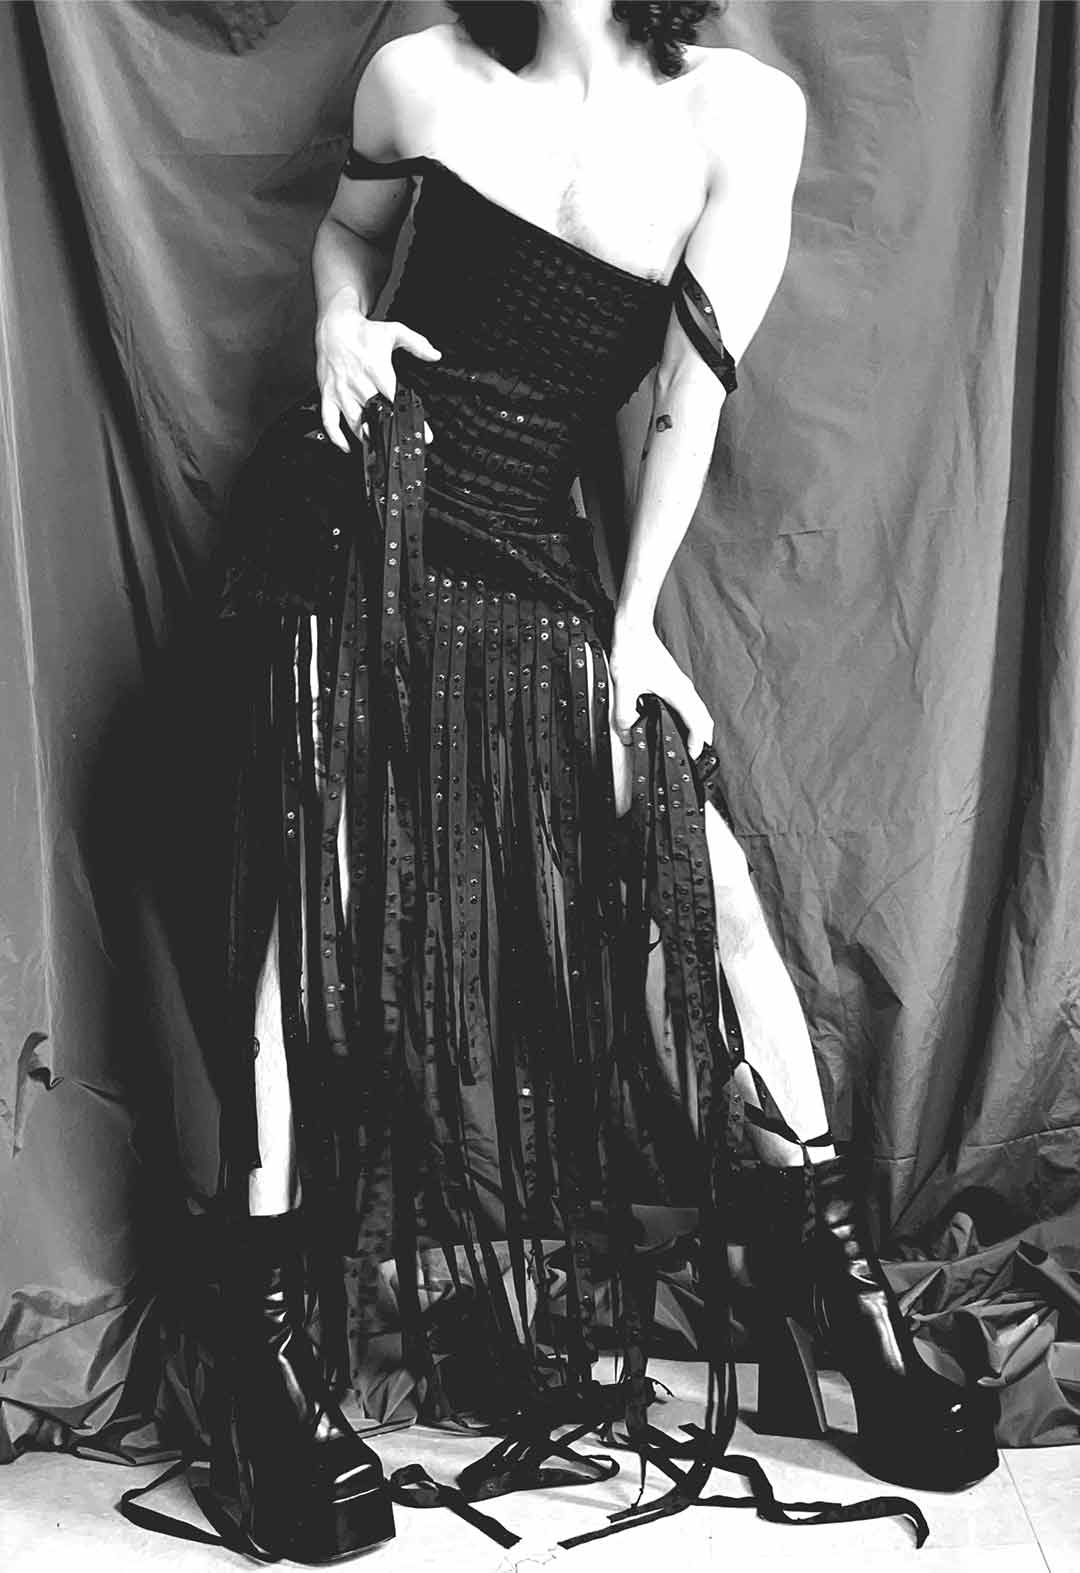 Detail view of model wearing black corset and matching miniskirt. The model is hunched over, and the body is a bit distorted. The model is holding some of the fringed pieces of the skirt.